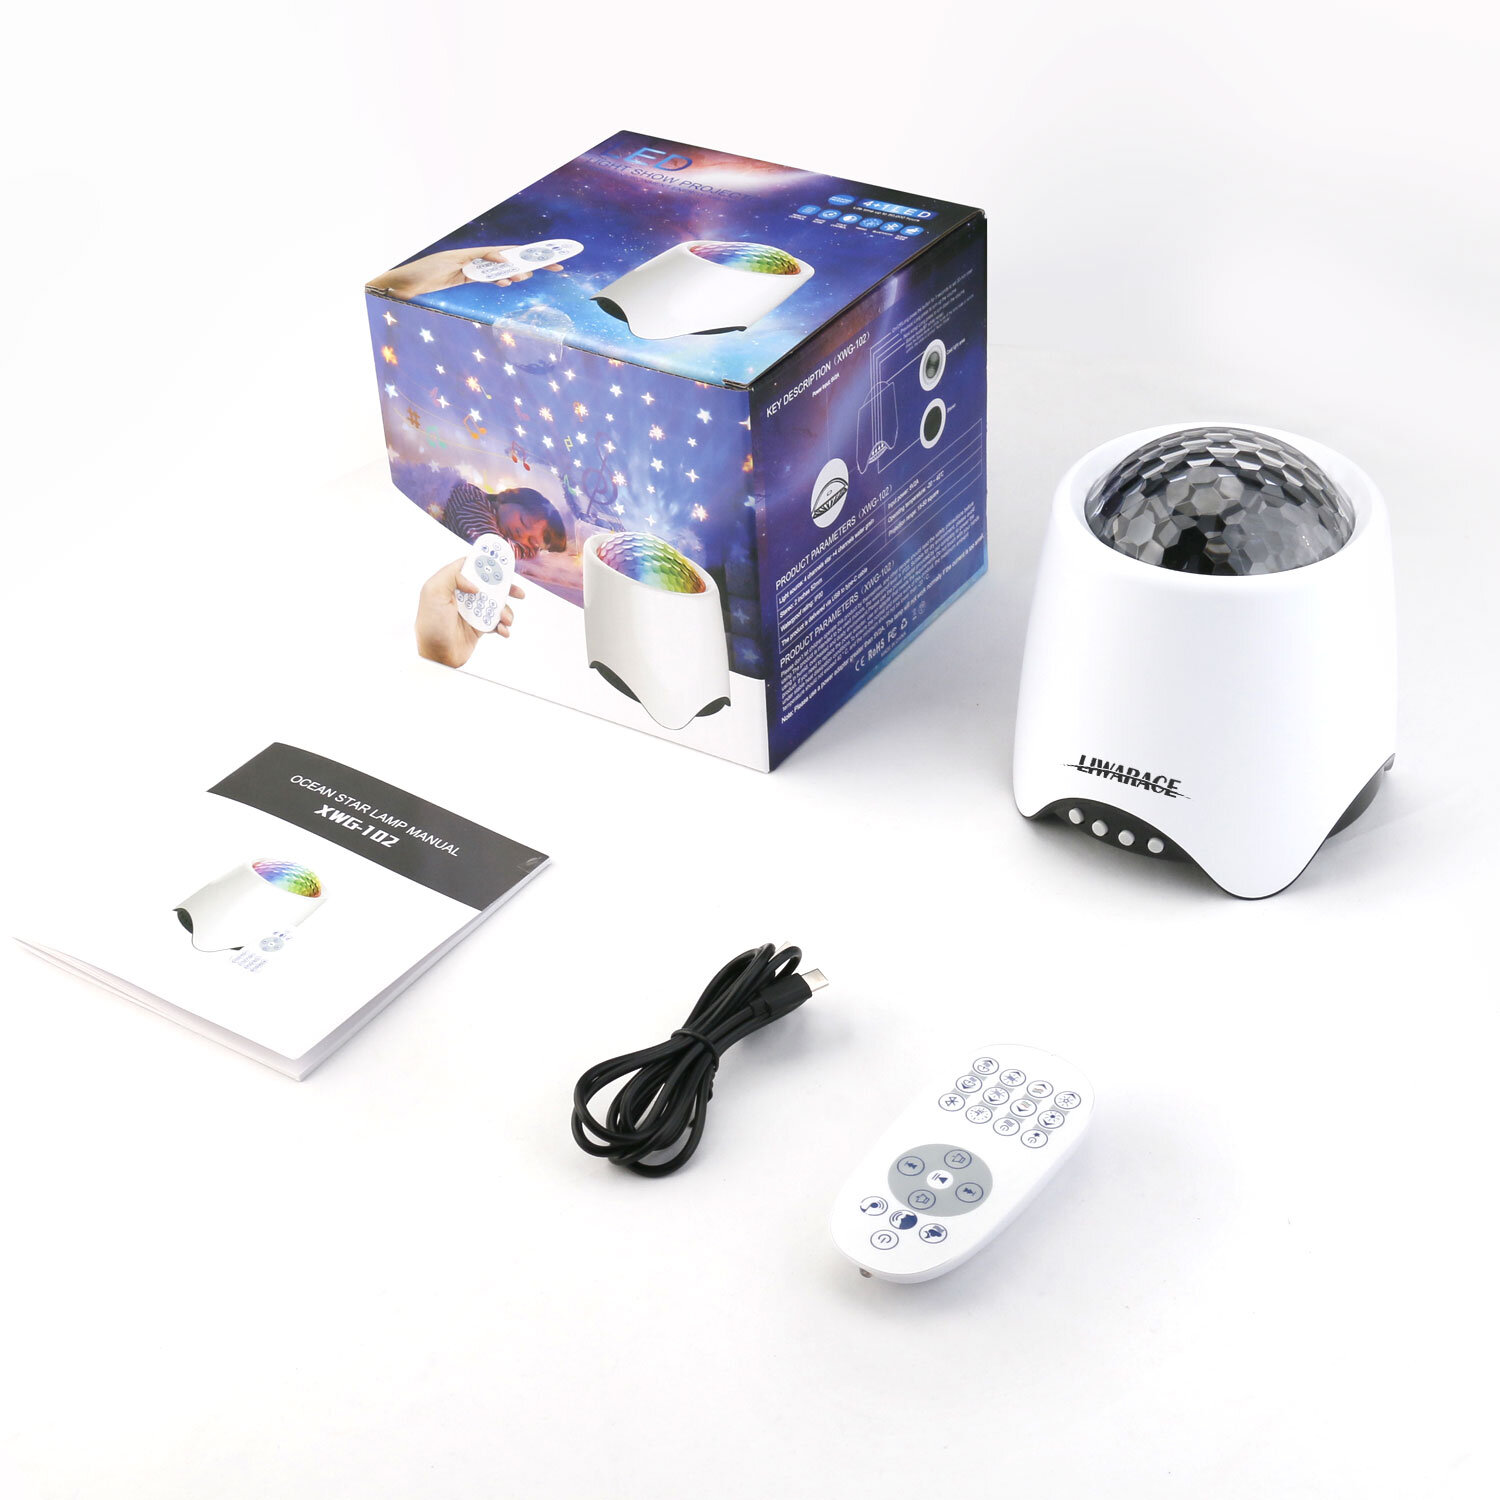 diep Onverbiddelijk Catastrofaal Liwarace 2-In-1 Star Projector And Sound Machine, Htwon Night Light For  Kids Adult Bedroom With 8 White Noise, 8 Soothing Music, Bluetooth Speaker,  Starry Star Light Ocean Wave Projector For Baby Sleeping | Wayfair